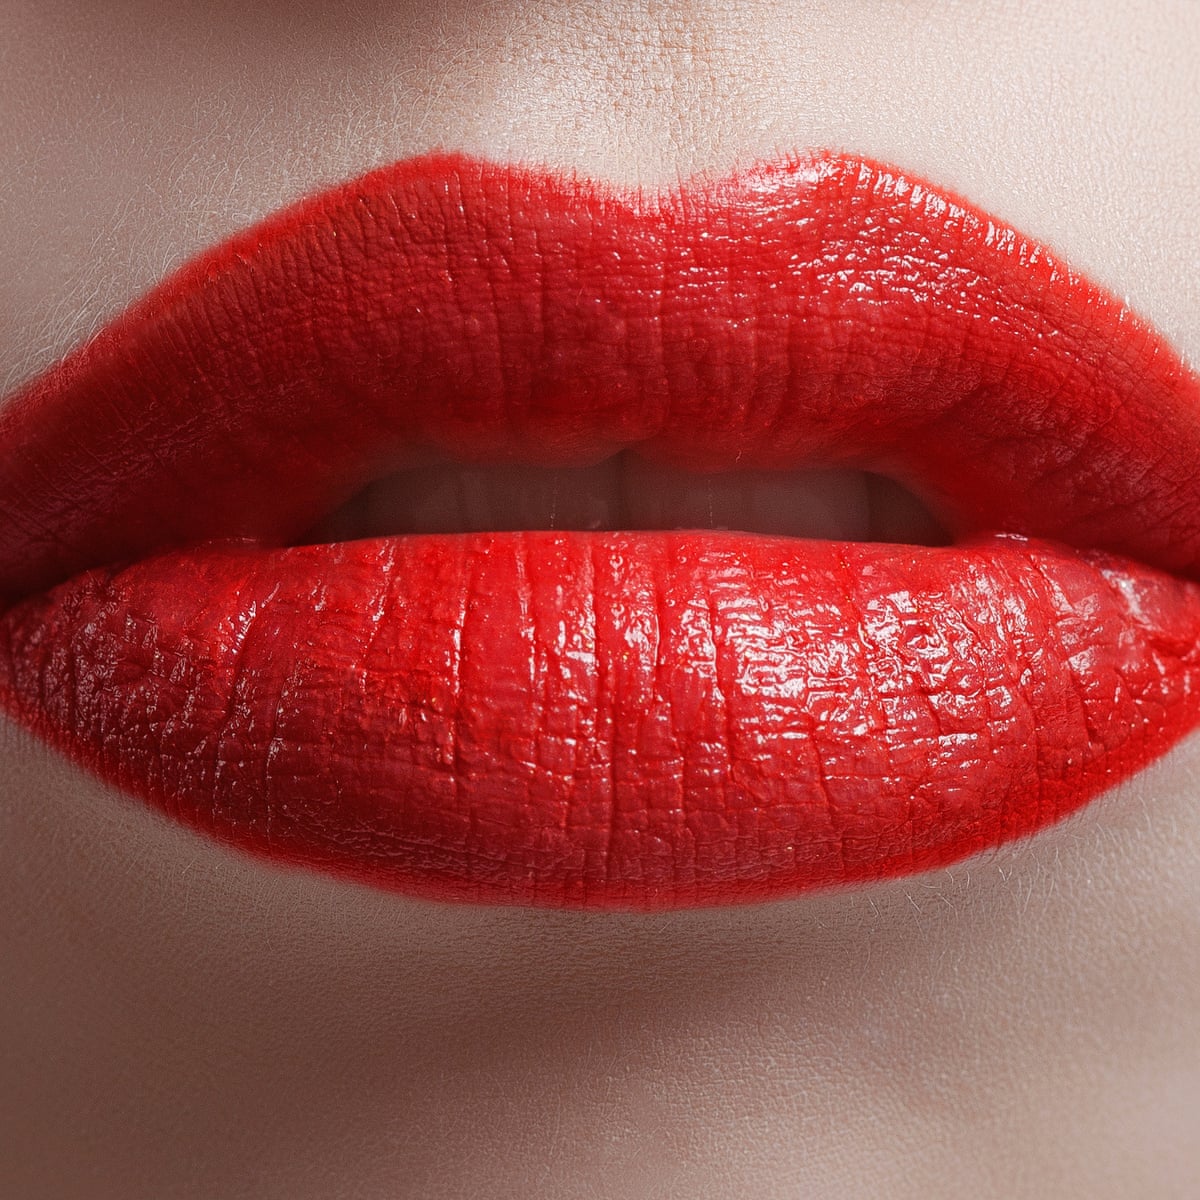 Red lips can lipstick wear thin Lipstick Tips